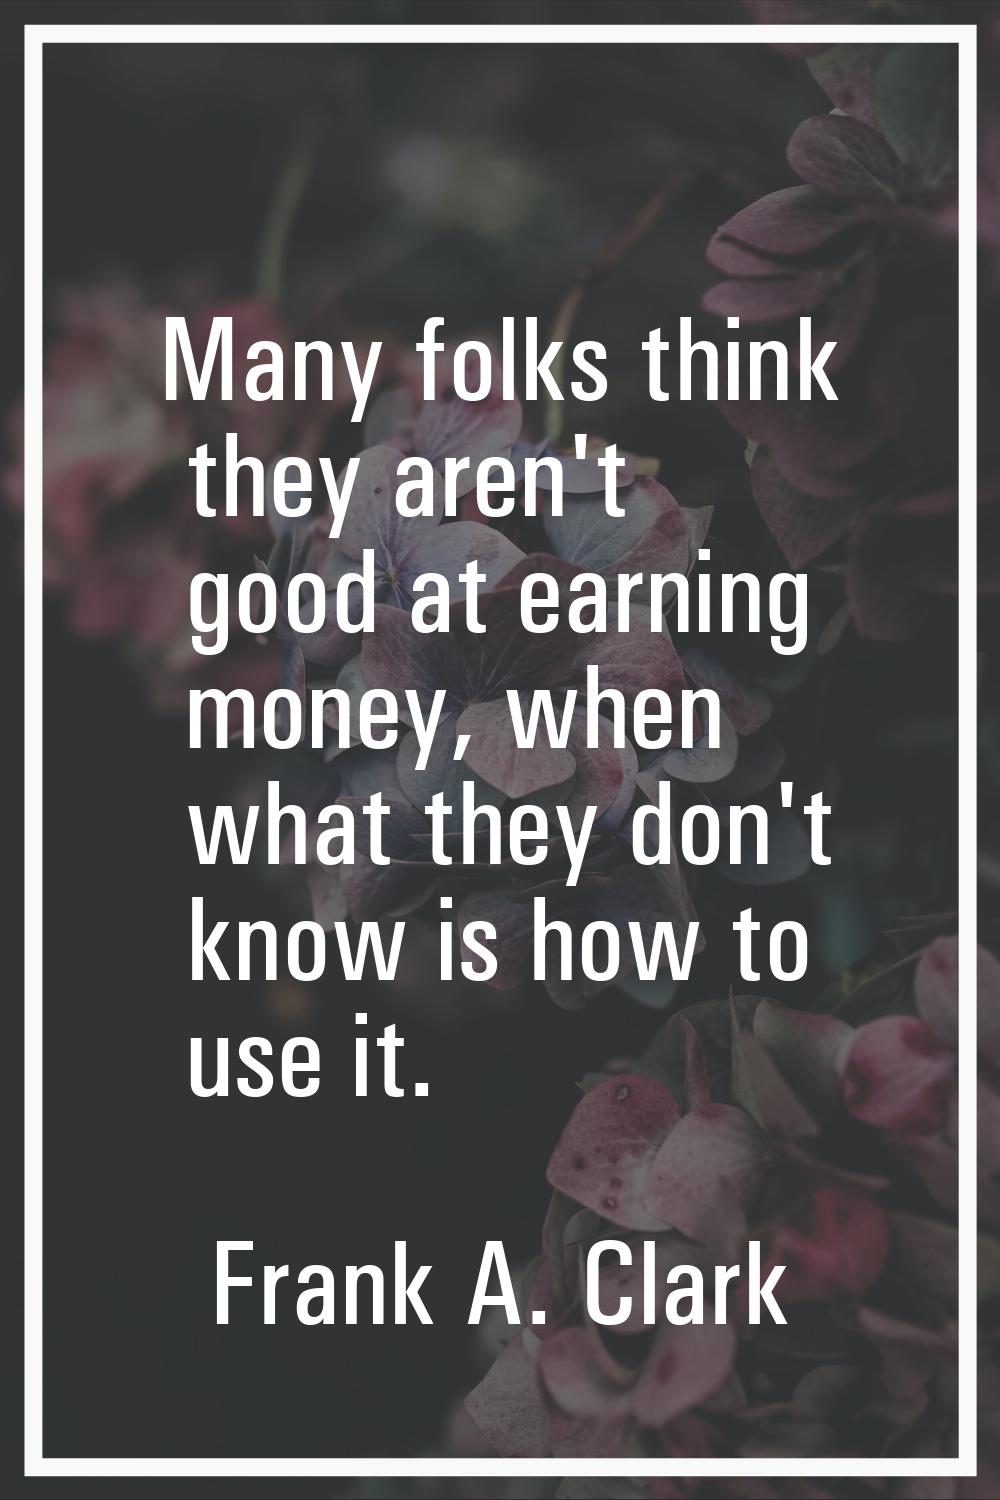 Many folks think they aren't good at earning money, when what they don't know is how to use it.